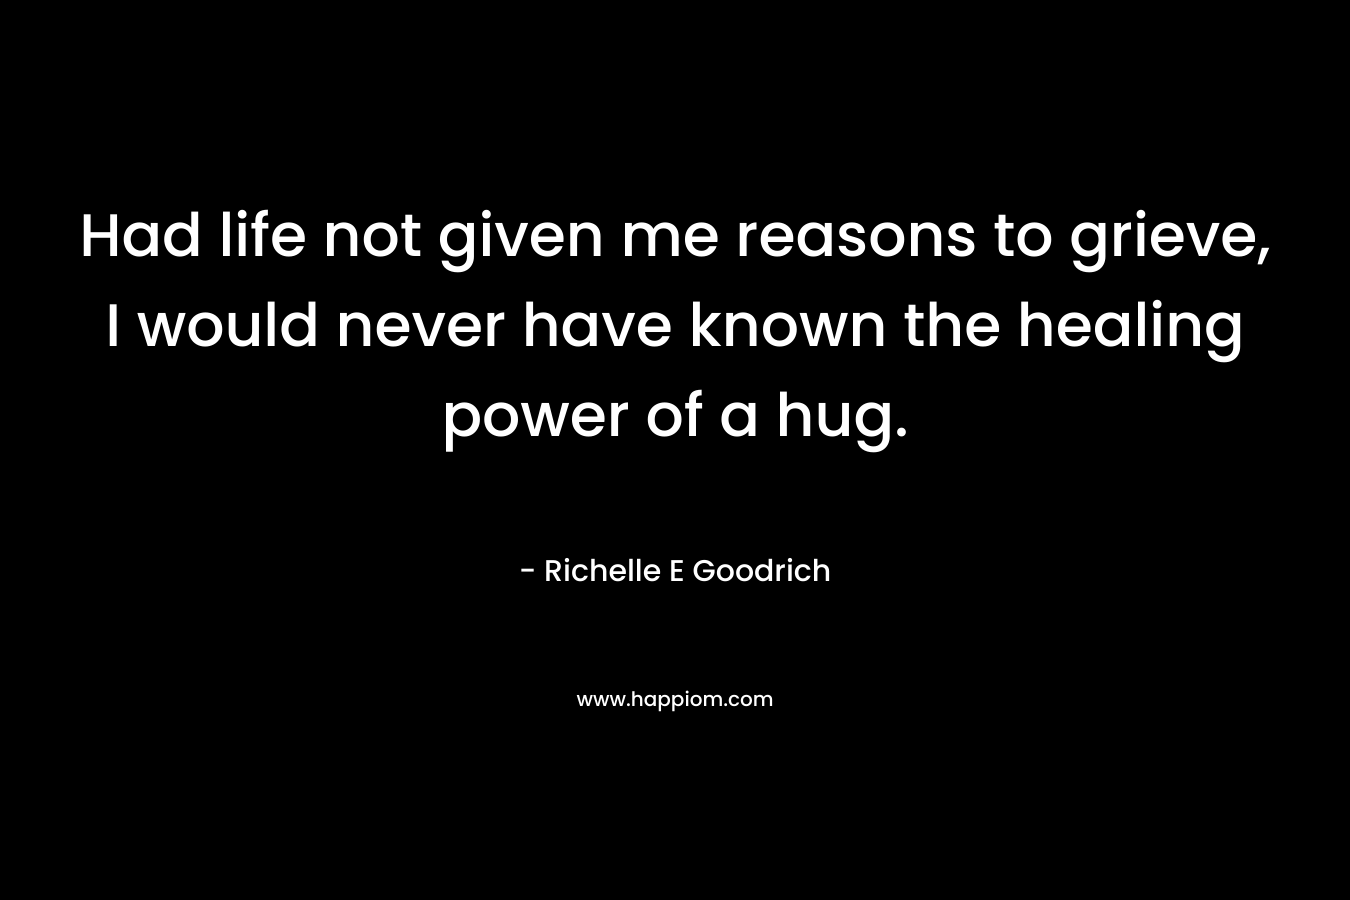 Had life not given me reasons to grieve, I would never have known the healing power of a hug.